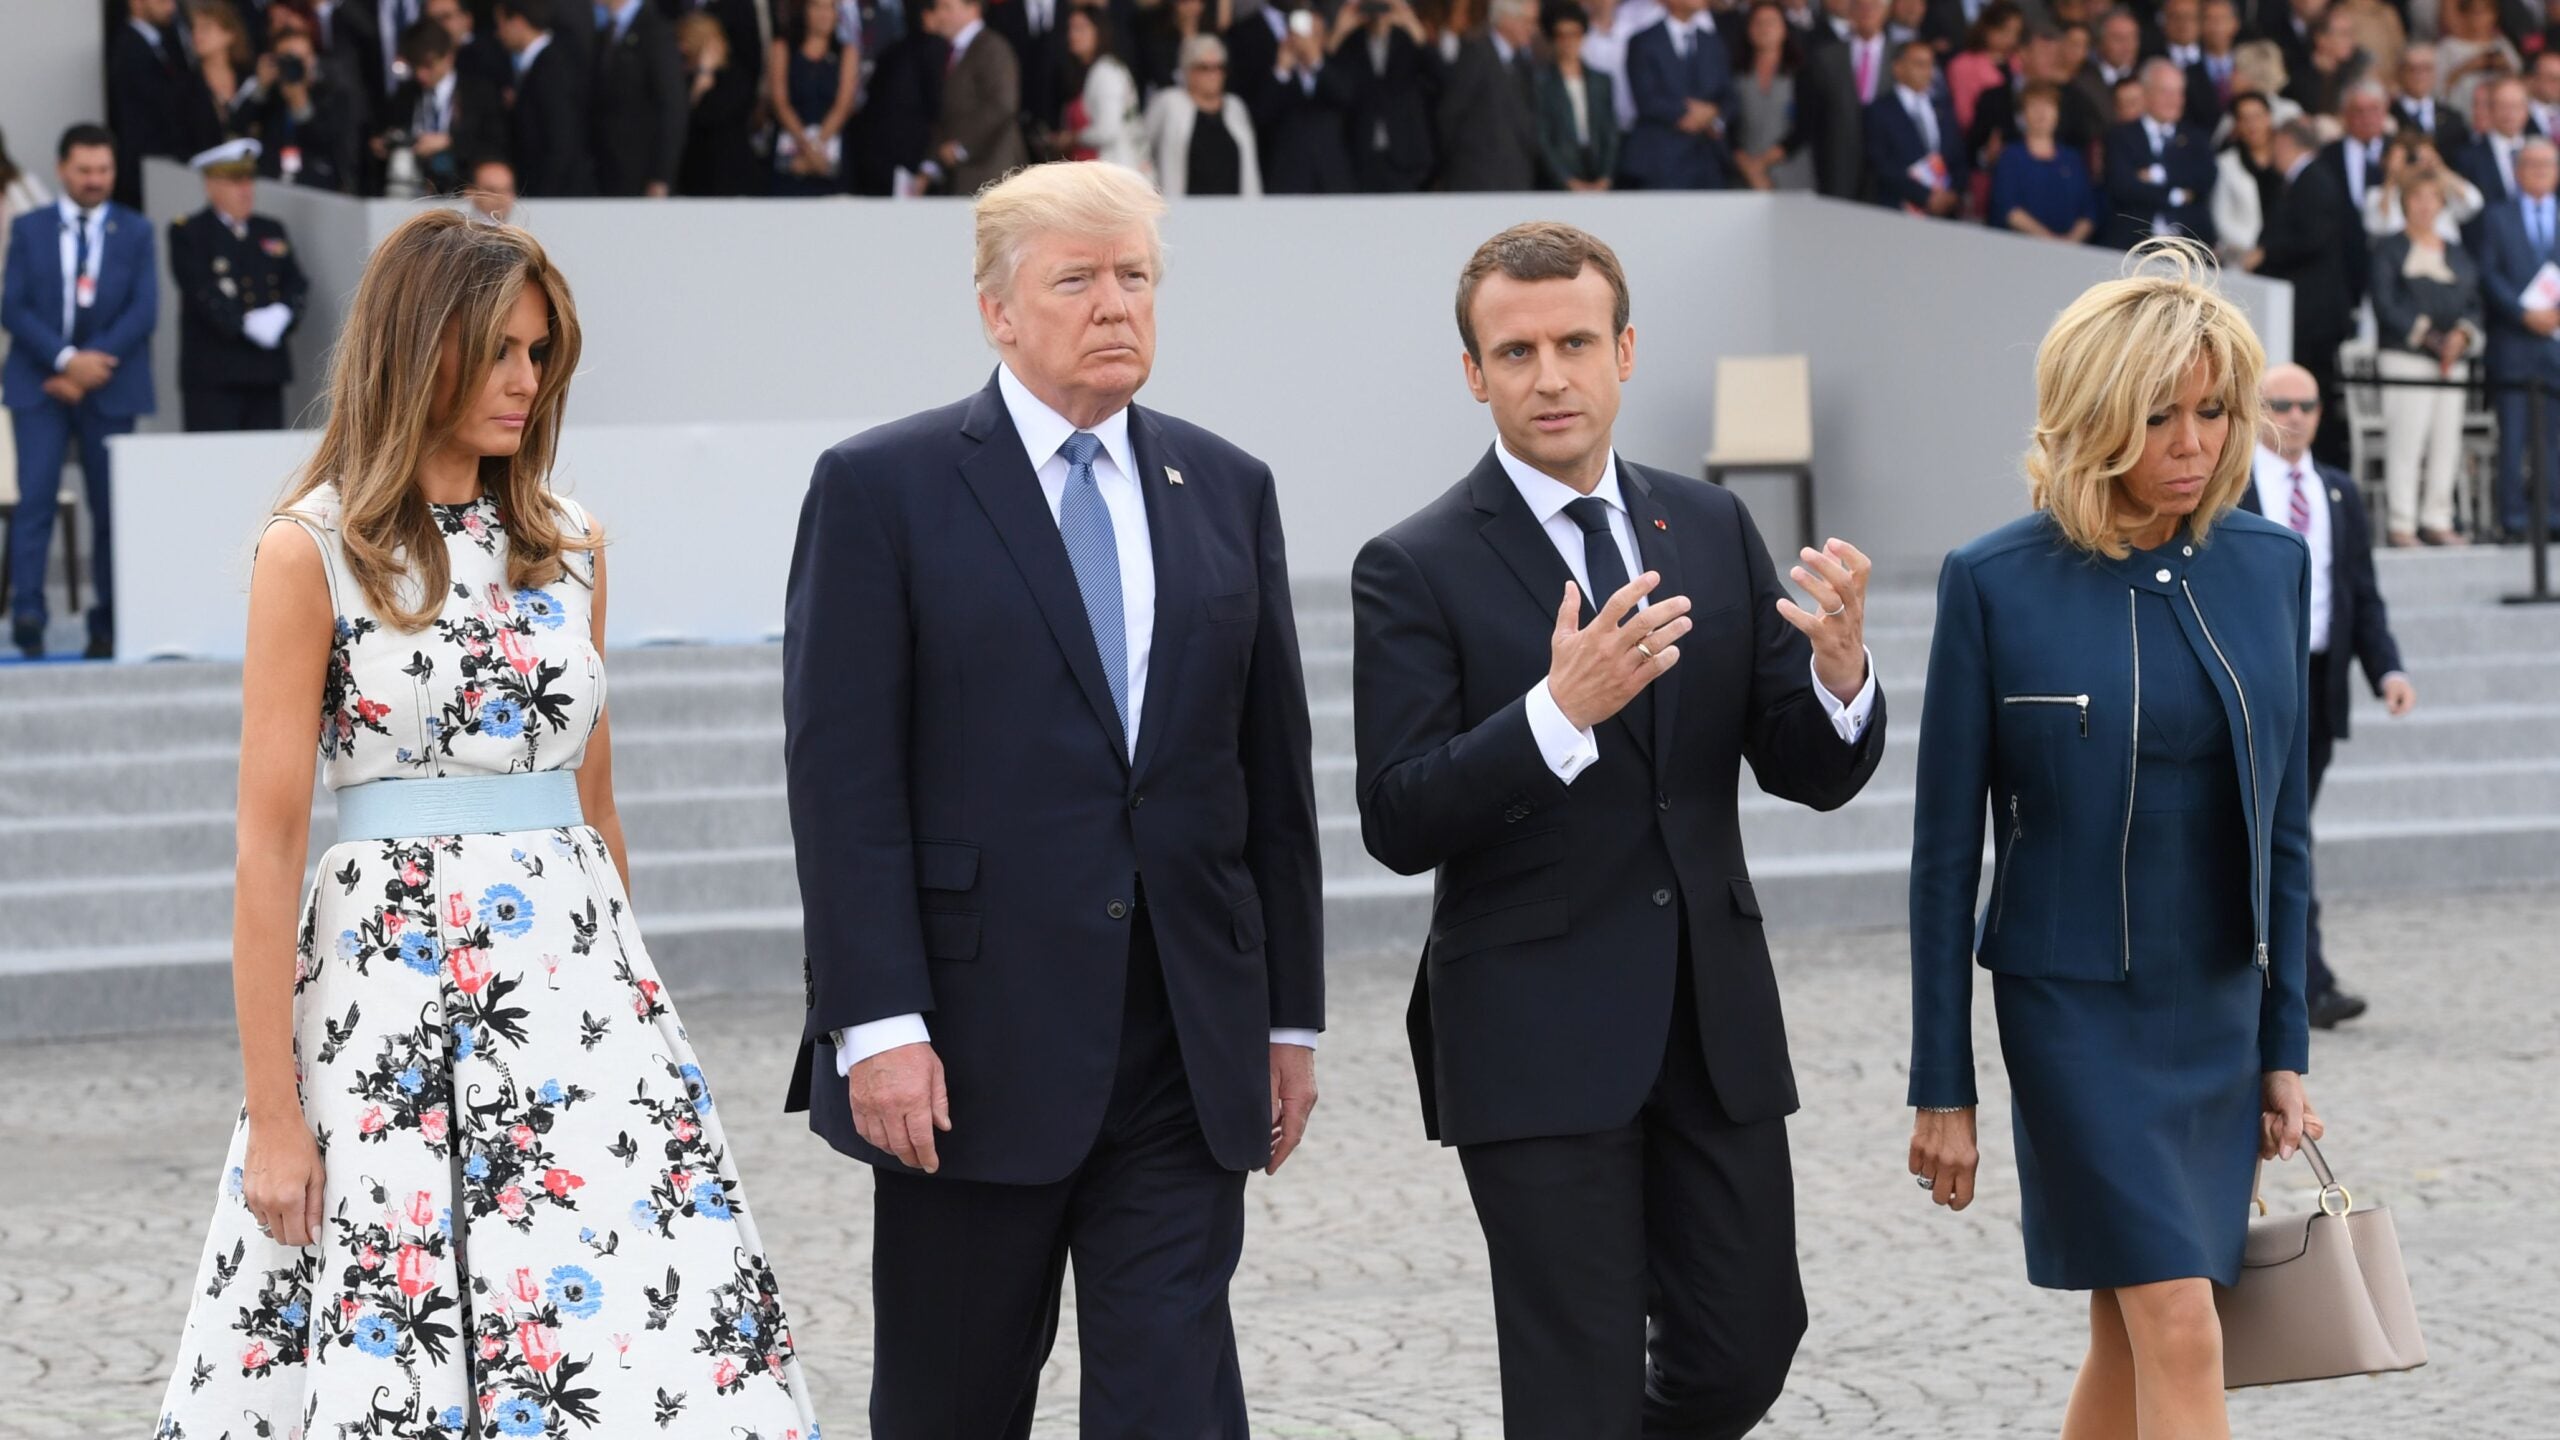 French President Emmanuel Macron (2nd R) and his wife Brigitte Macron walk with US President Donald Trump (2nd L) and US First Lady Melania Trump after attending the annual Bastille Day military parade on the Champs-Elysees avenue in Paris on July 14, 2017.
The parade on Paris's Champs-Elysees will commemorate the centenary of the US entering WWI and will feature horses, helicopters, planes and troops. / AFP PHOTO / POOL / CHRISTOPHE ARCHAMBAULT        (Photo credit should read CHRISTOPHE ARCHAMBAULT/AFP via Getty Images)